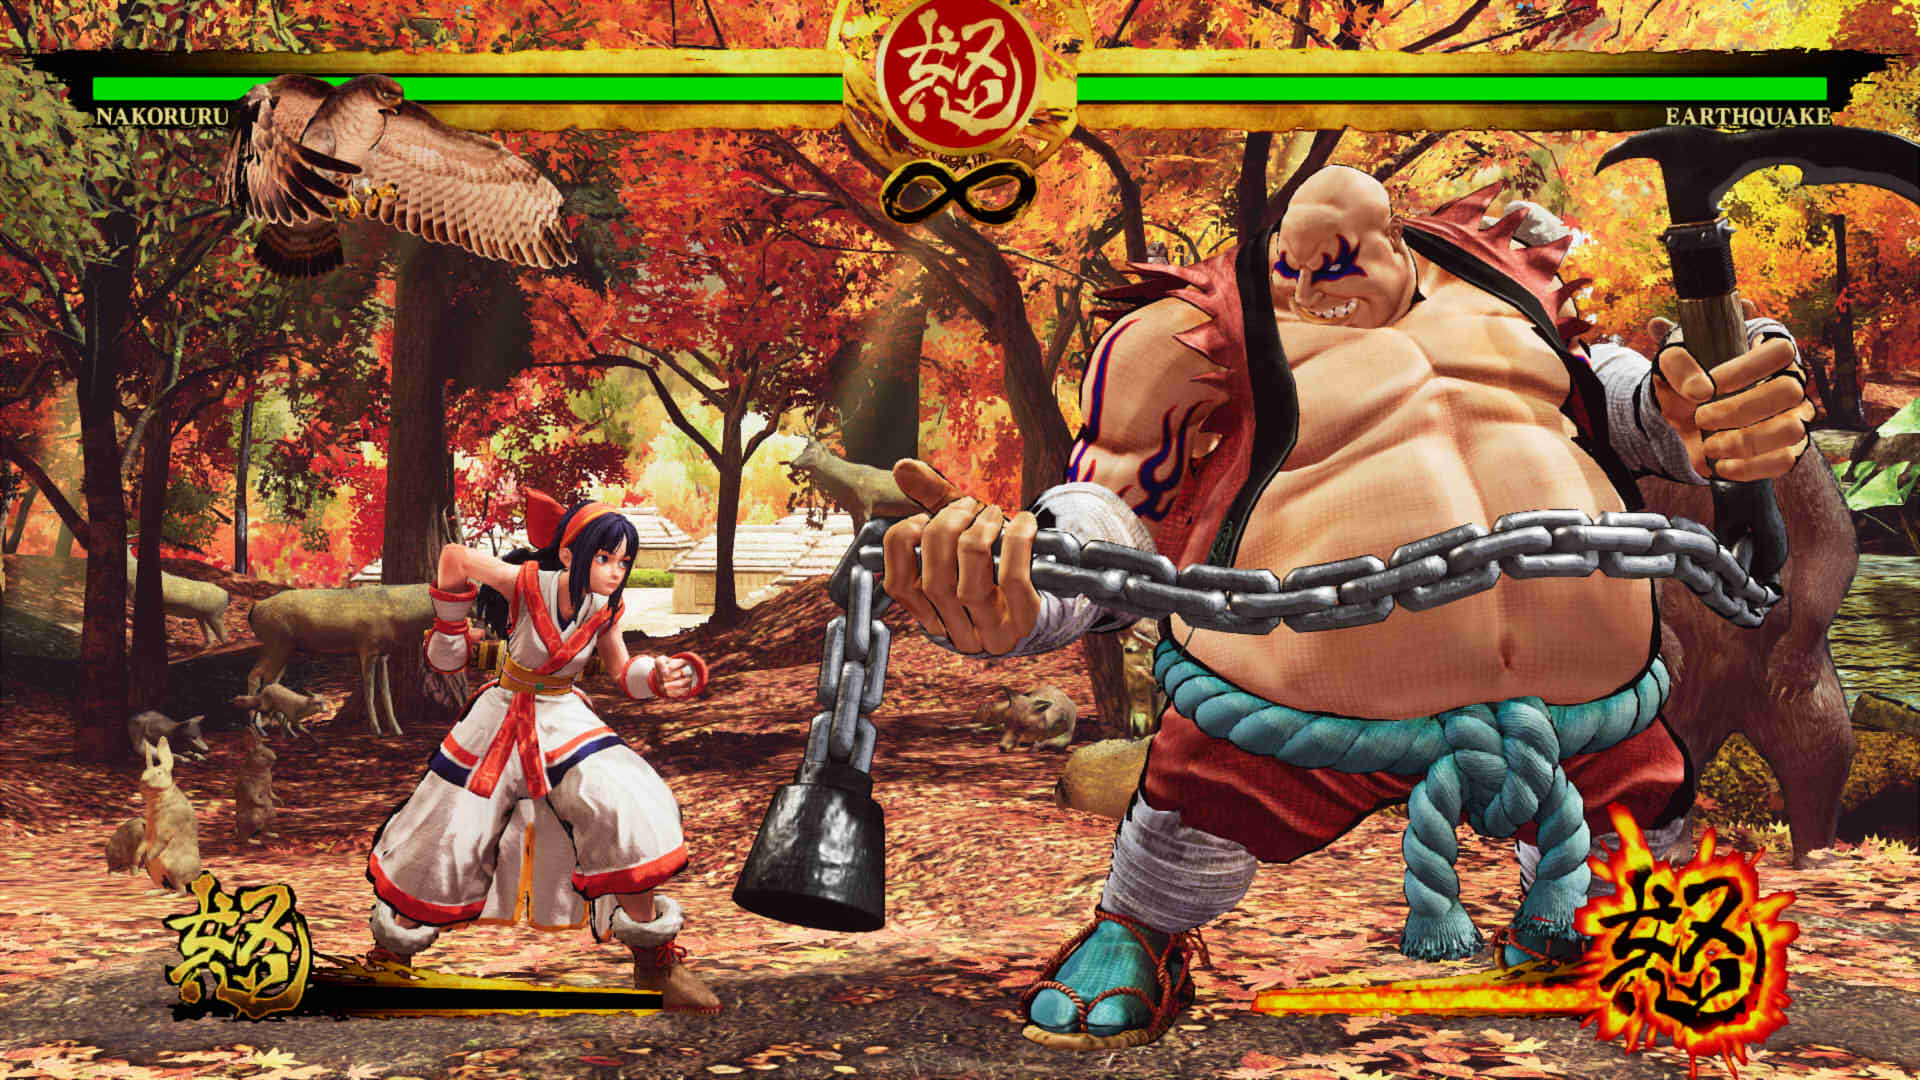 A small girl in a white and red martial arts outfit is fighting a huge, bulking, bald man with a large belly